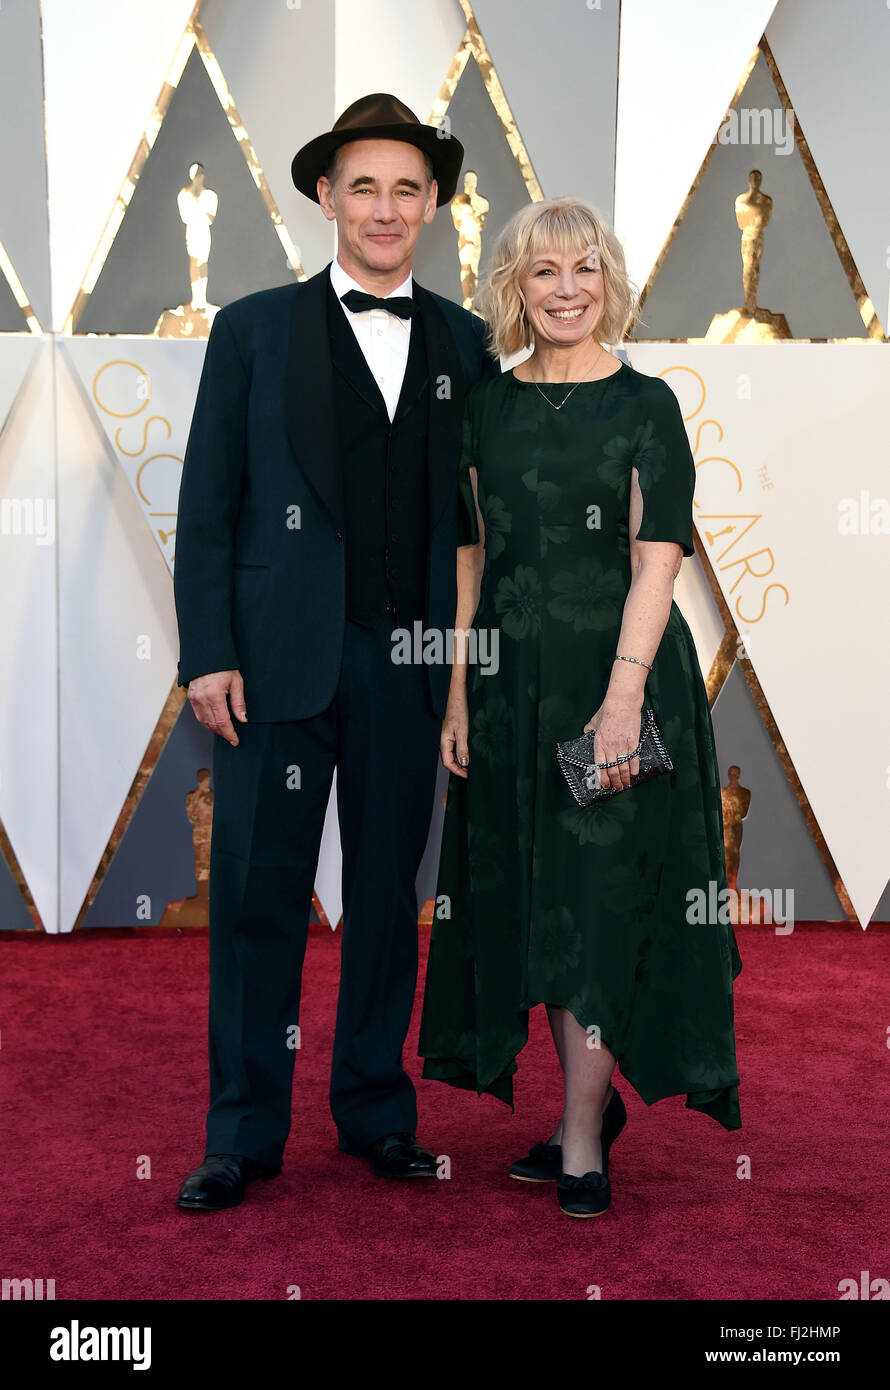 Hollywood, California, USA. 28th Feb, 2016. MARK RYLANCE AND CLAIRE VAN KAMPEN on the red carpet during arrivals for the 88th Academy Awards held at the Dolby Theatre. Credit:  Lisa O'Connor/ZUMA Wire/Alamy Live News Stock Photo